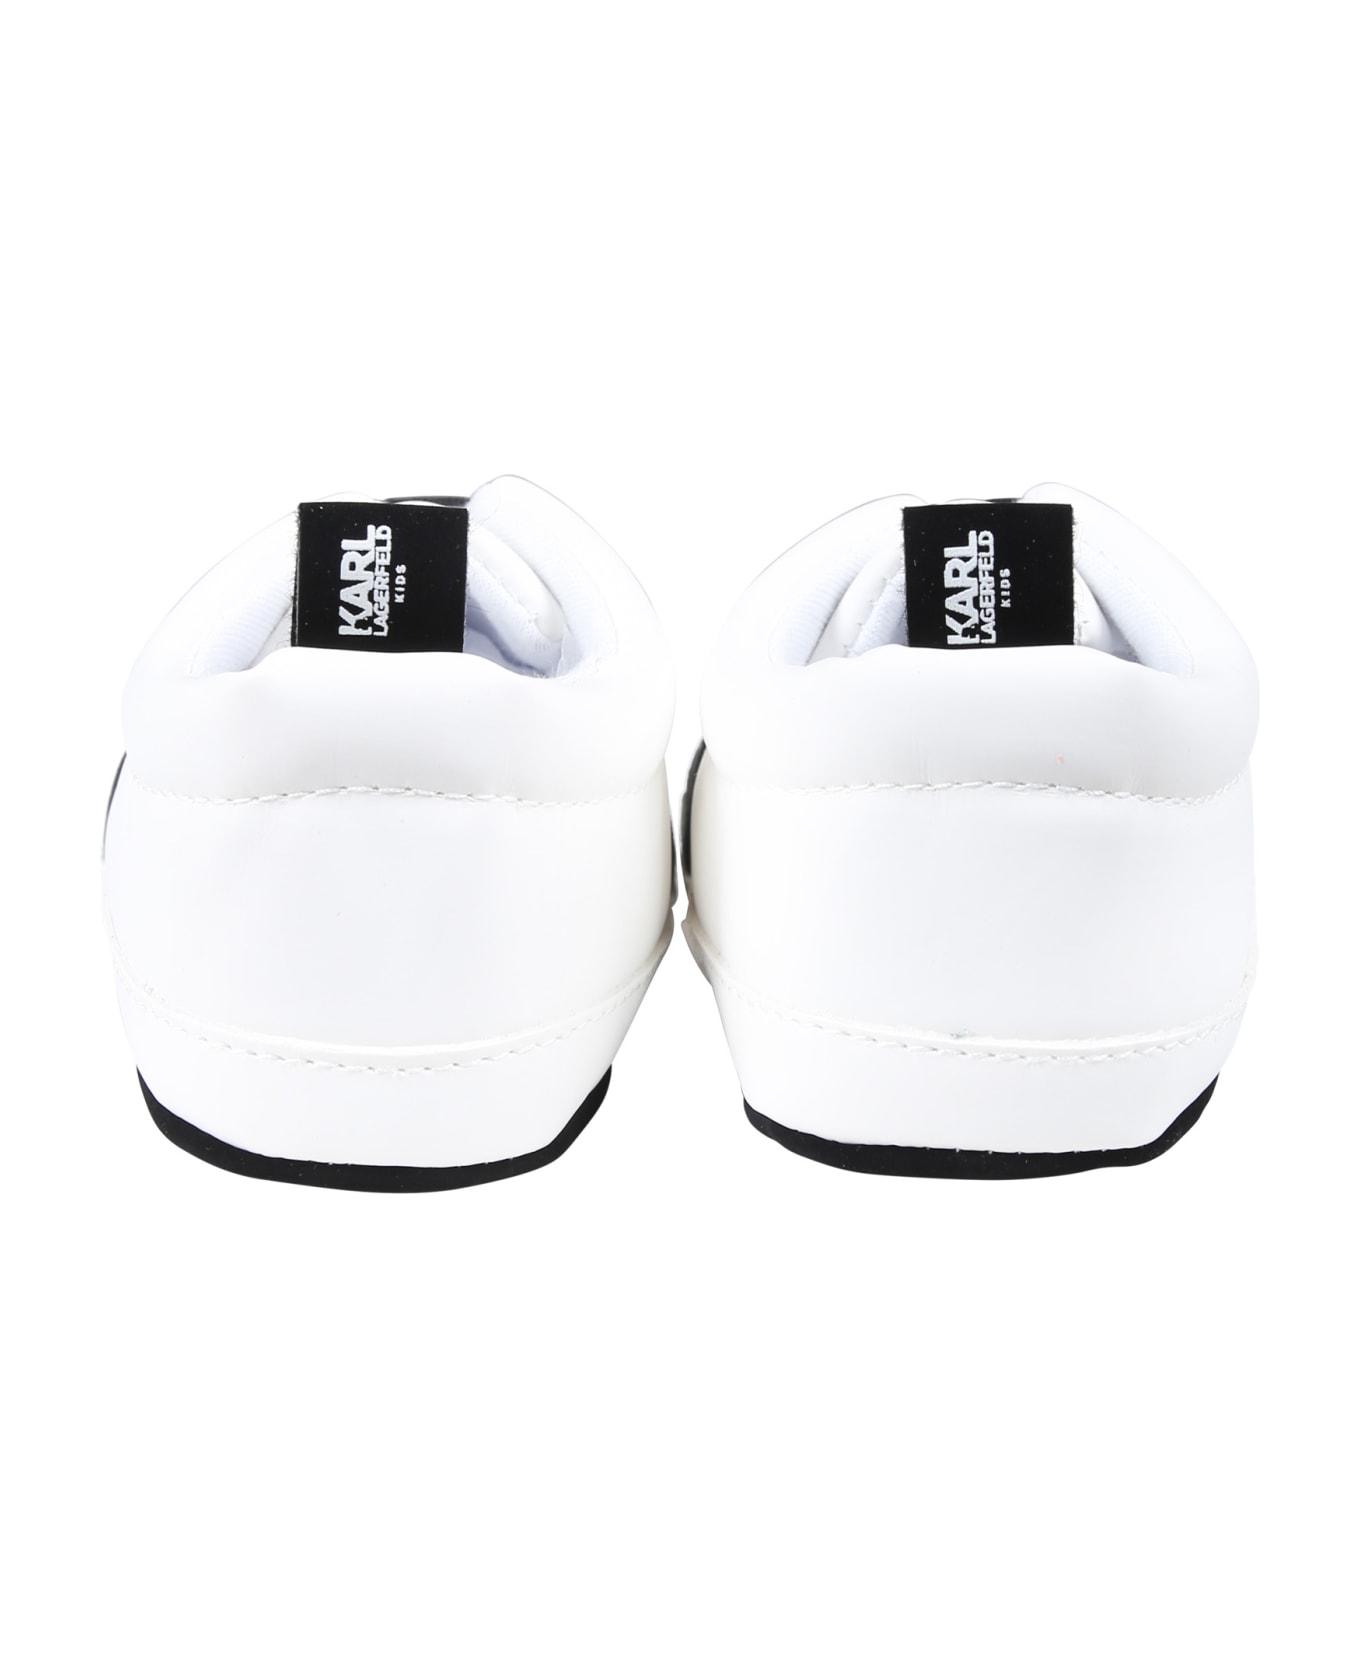 Karl Lagerfeld Kids White Sneakers For Babies With Logo - White